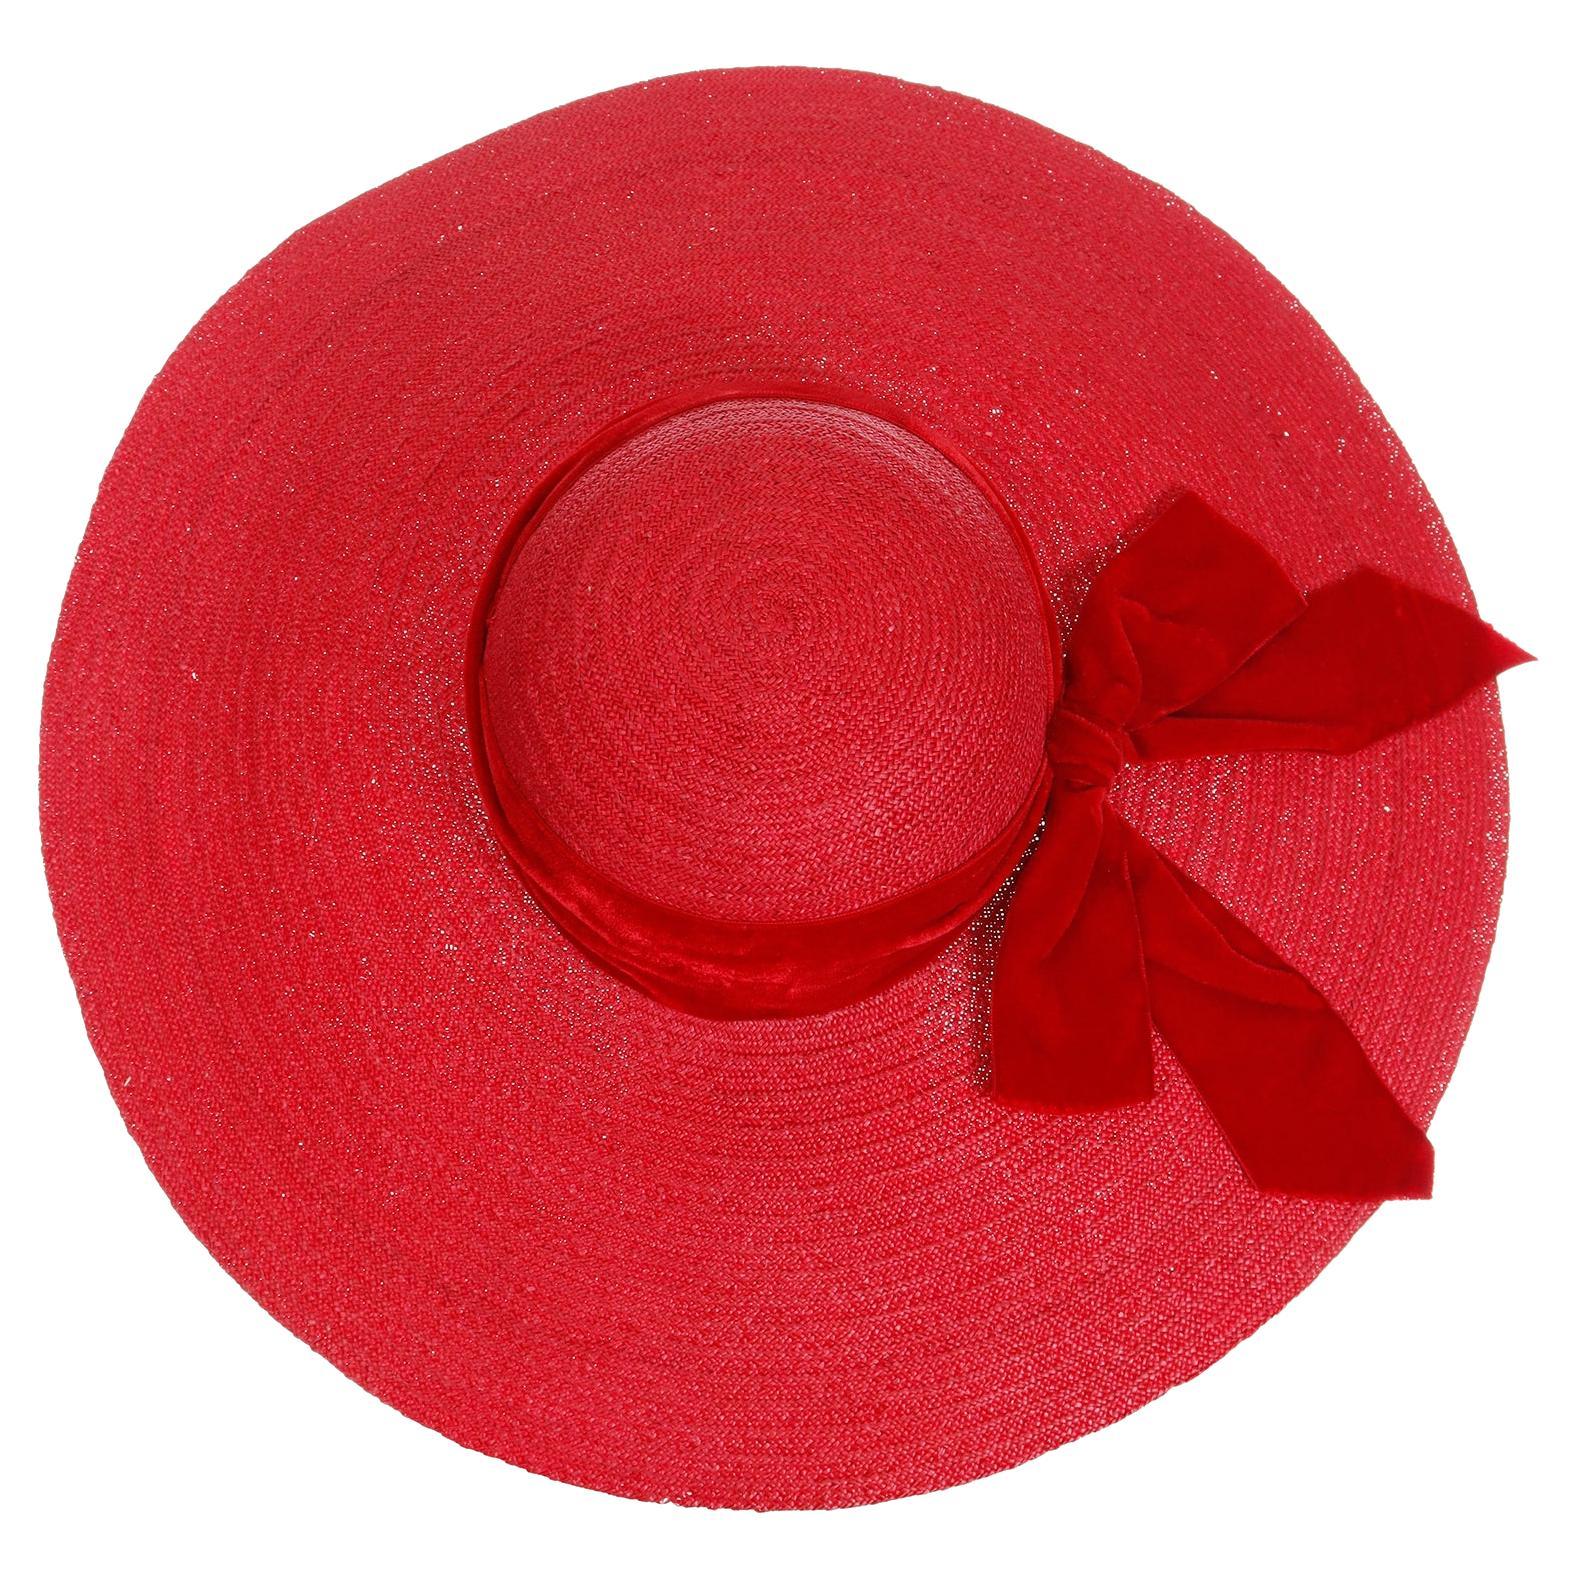 Vintage 1940s Wide Brim Red Straw Hat With Red Velvet Ribbon by Mr Leon